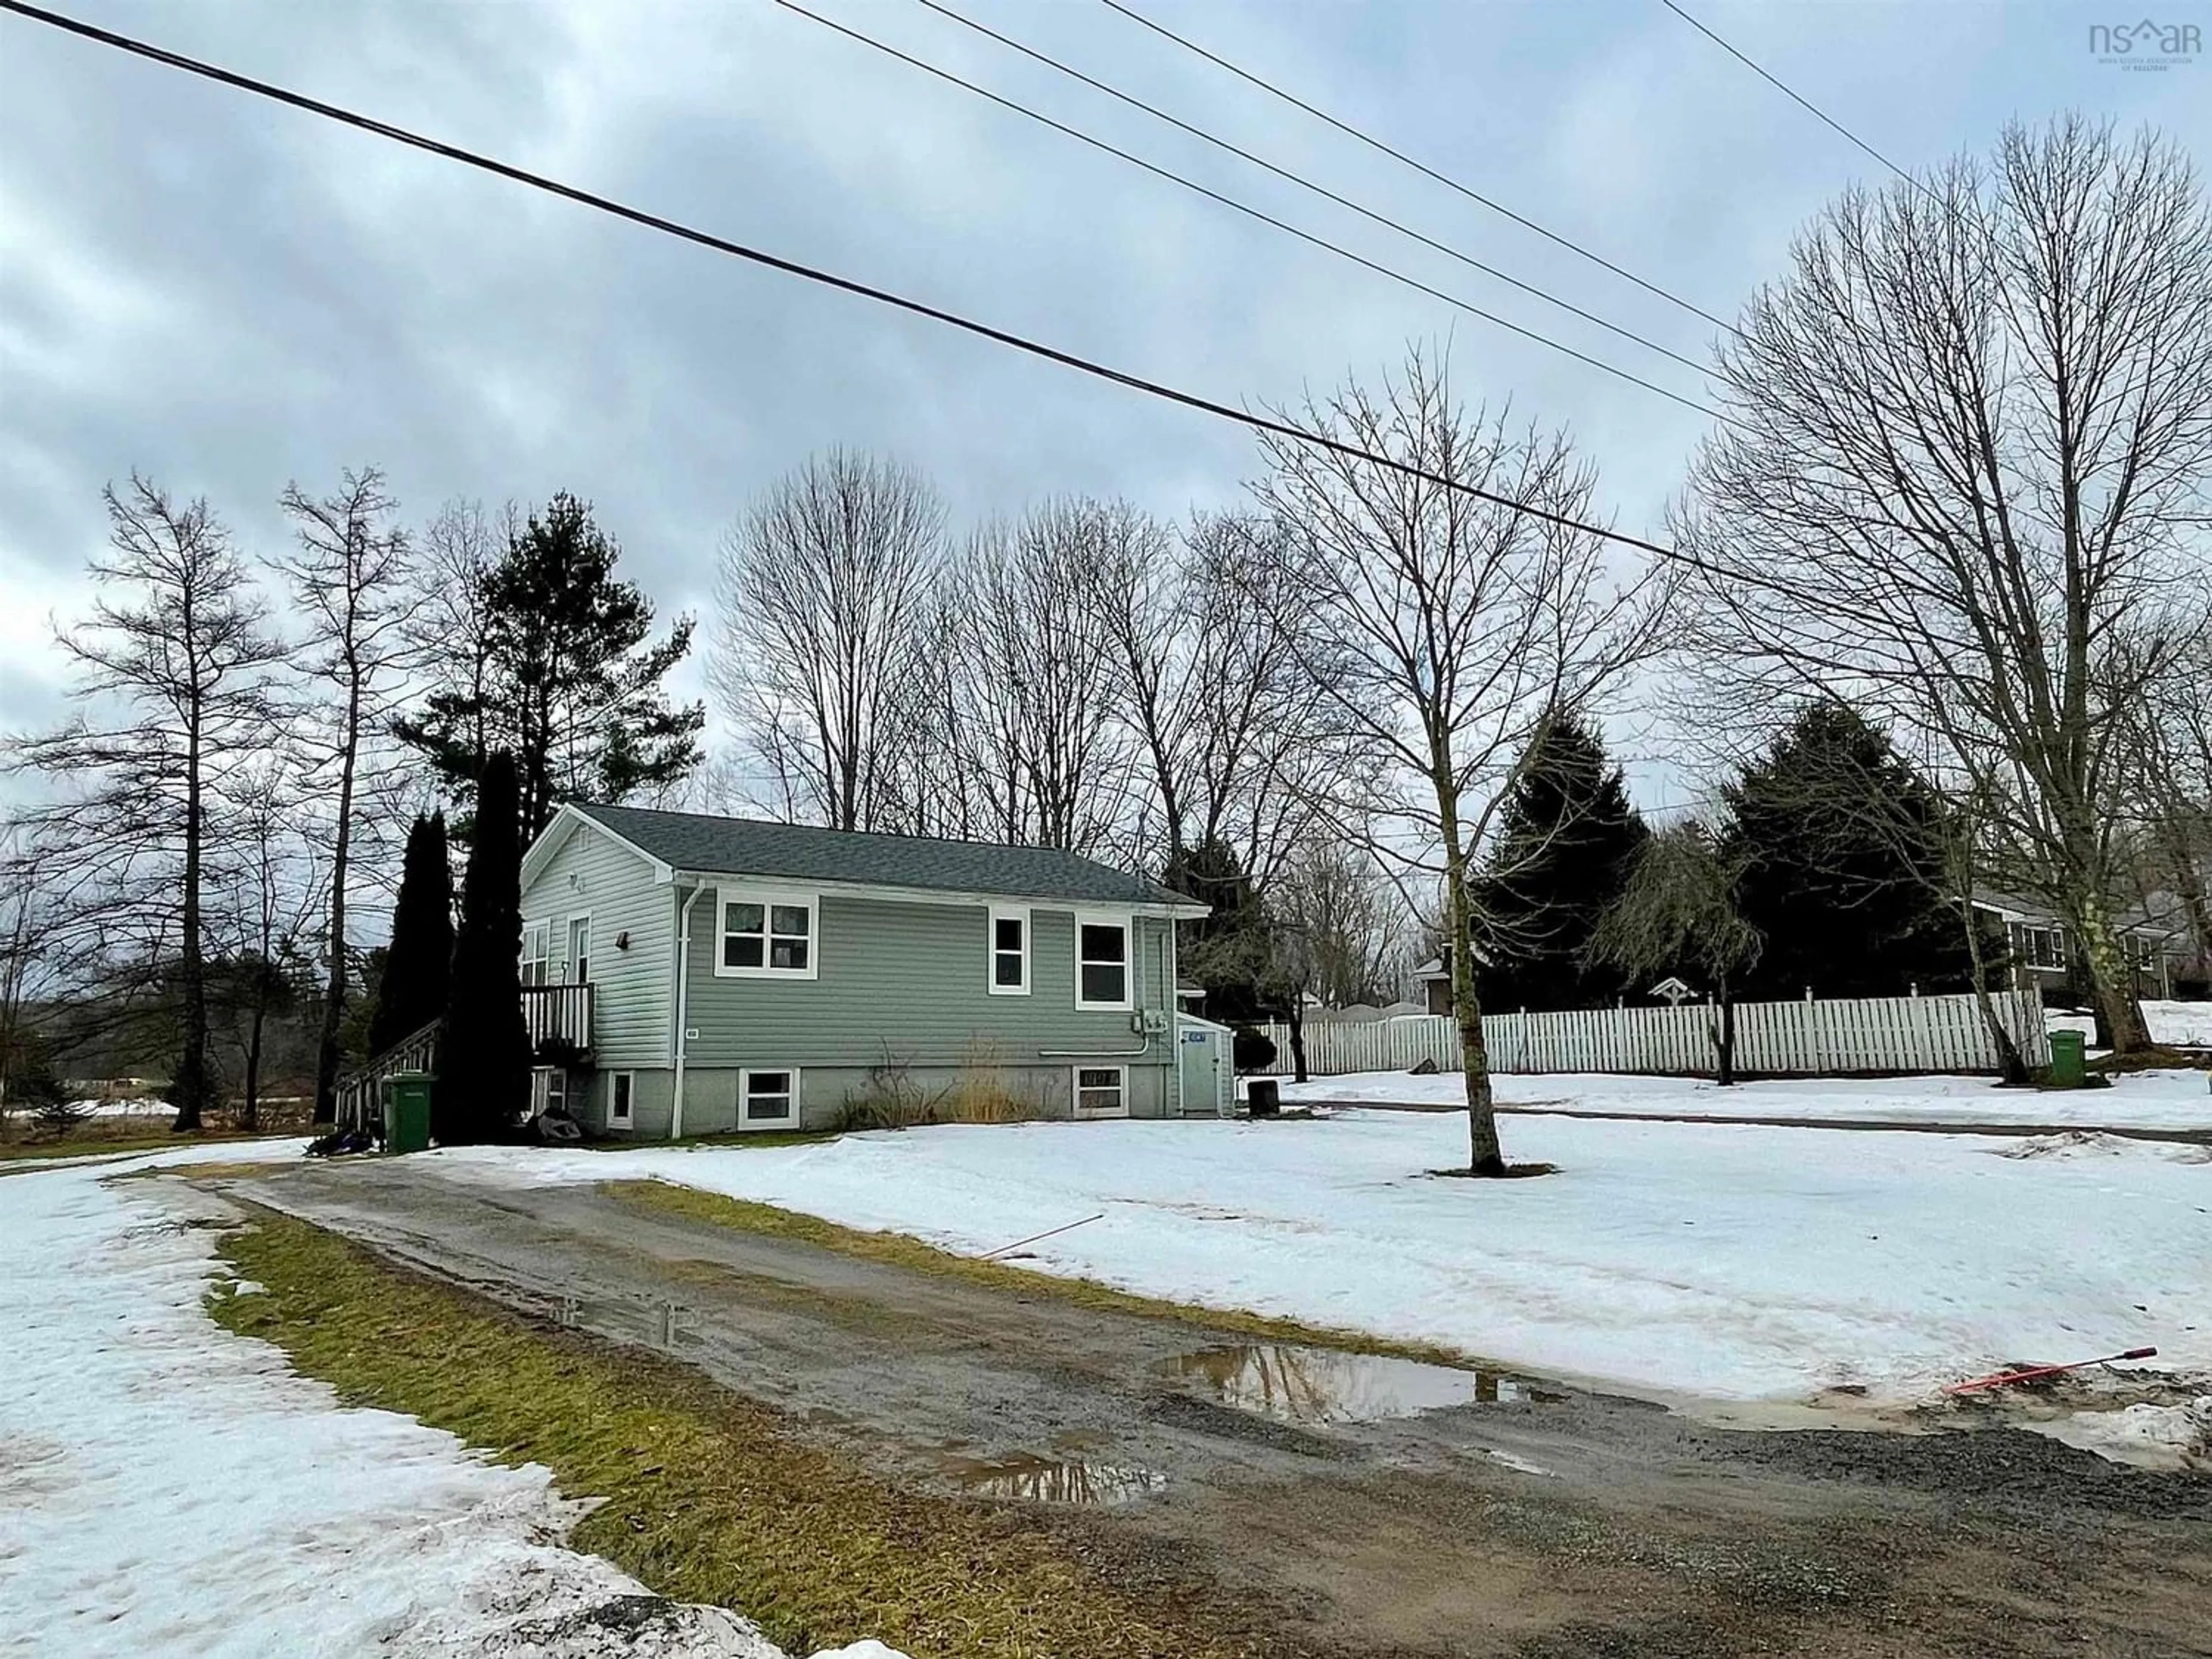 Home with unknown exterior material for 1045 / 1047 Upper Church St, North Kentville Nova Scotia B4N 3V7